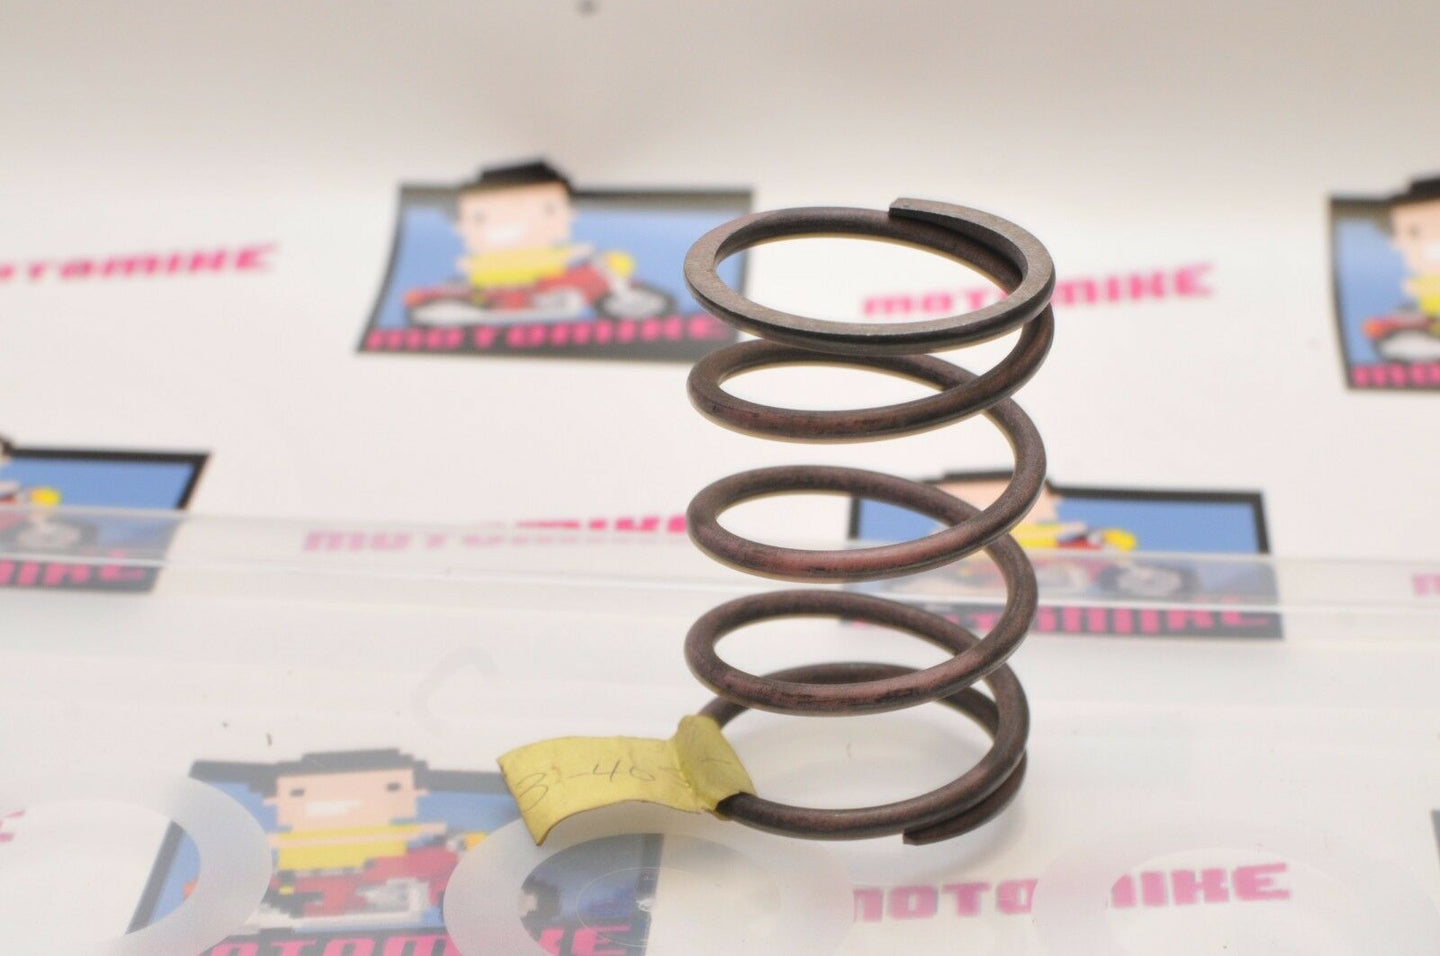 KIMPEX CLUTCH SPRING 03-405-9 (09) PINK? (PURPLE?) - Motomike Canada